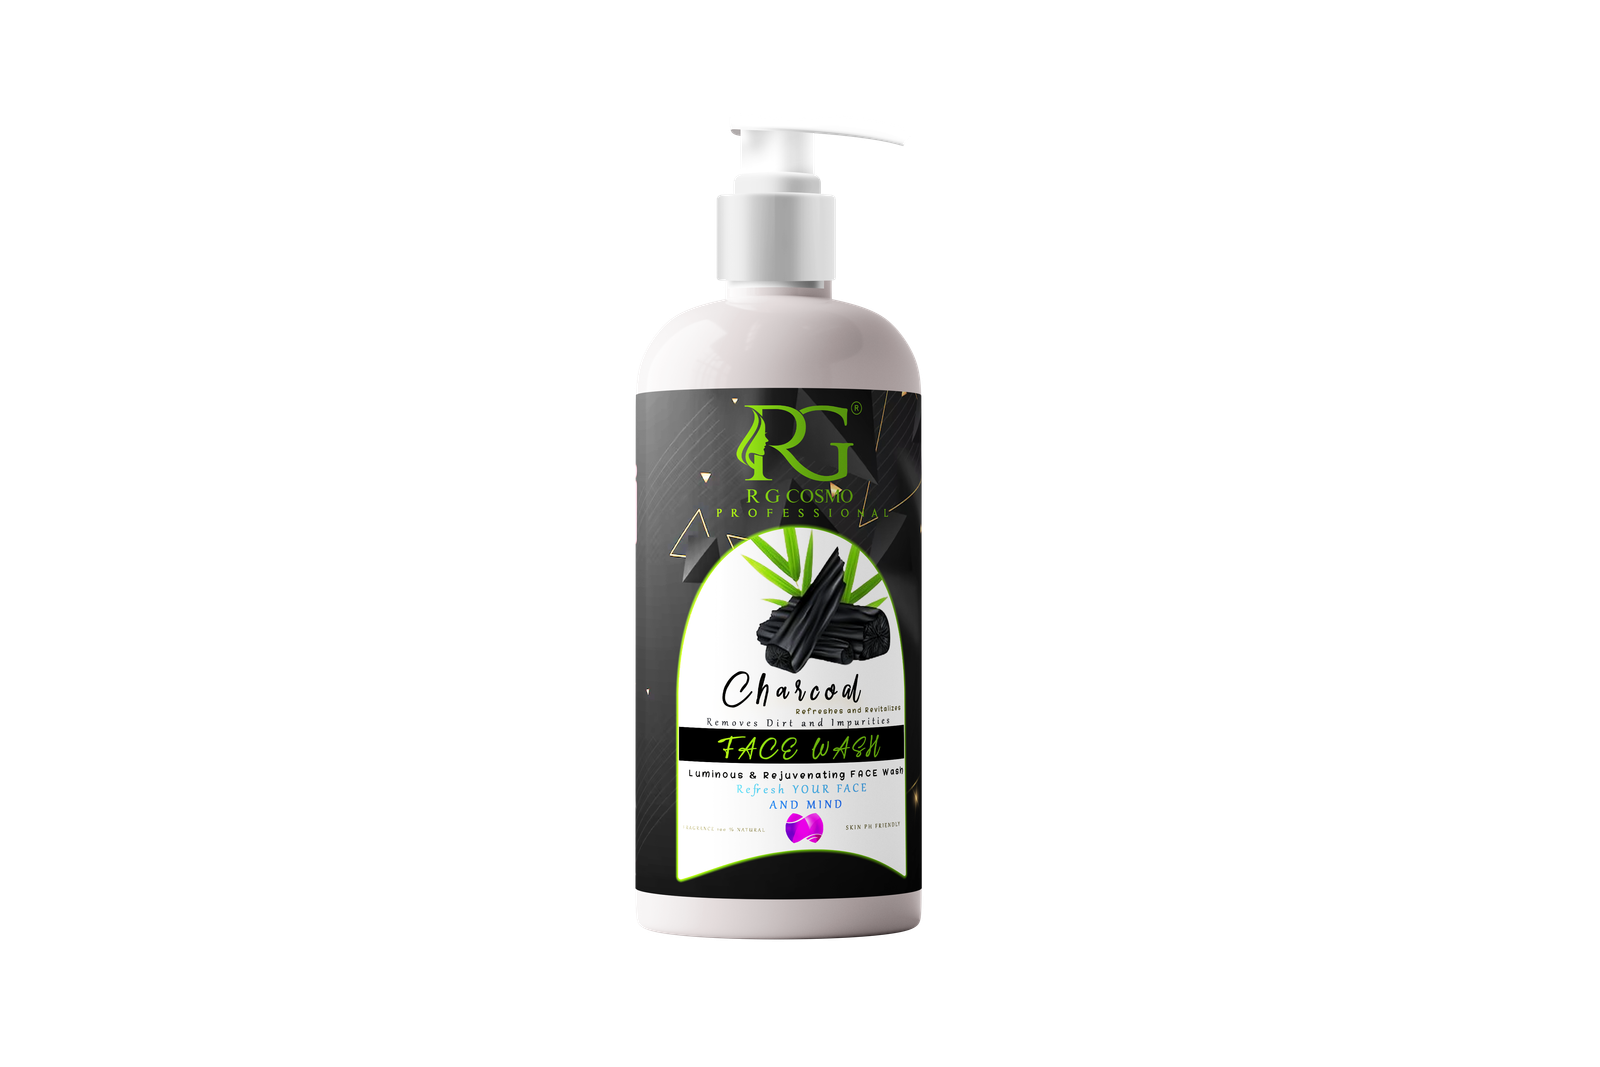 RG COSMO Charcoal FACE WASH 500ML